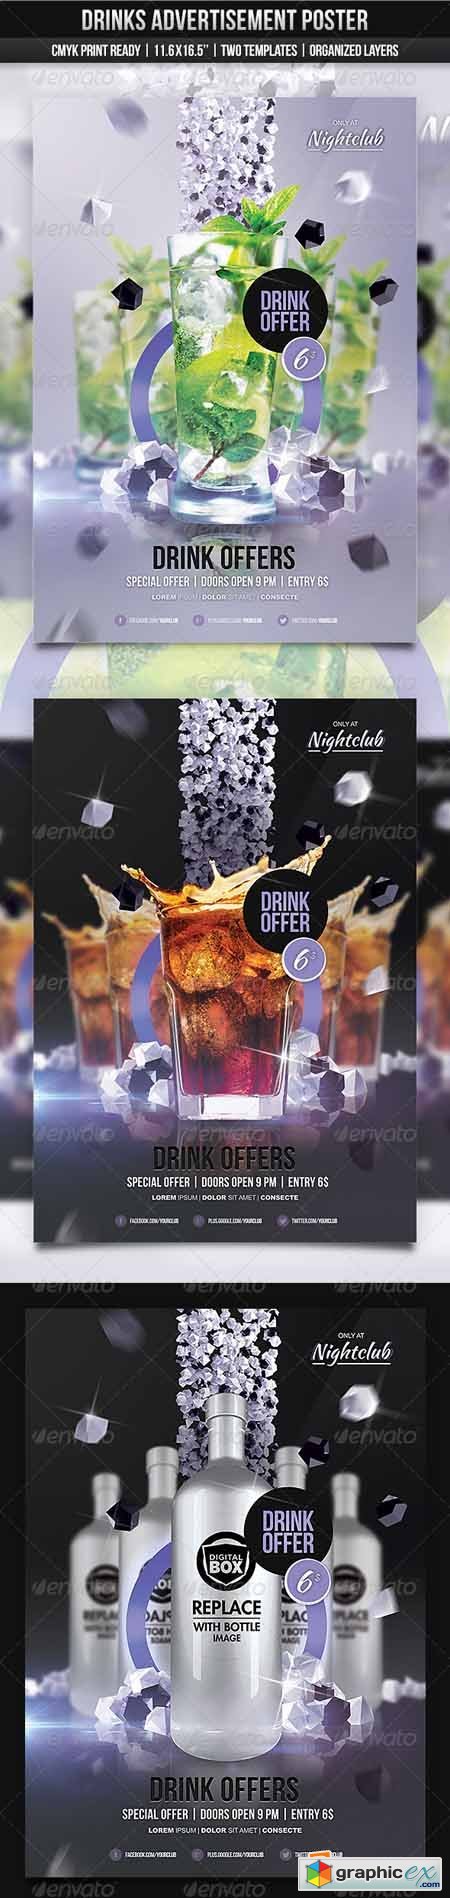 Drinks Ad Poster